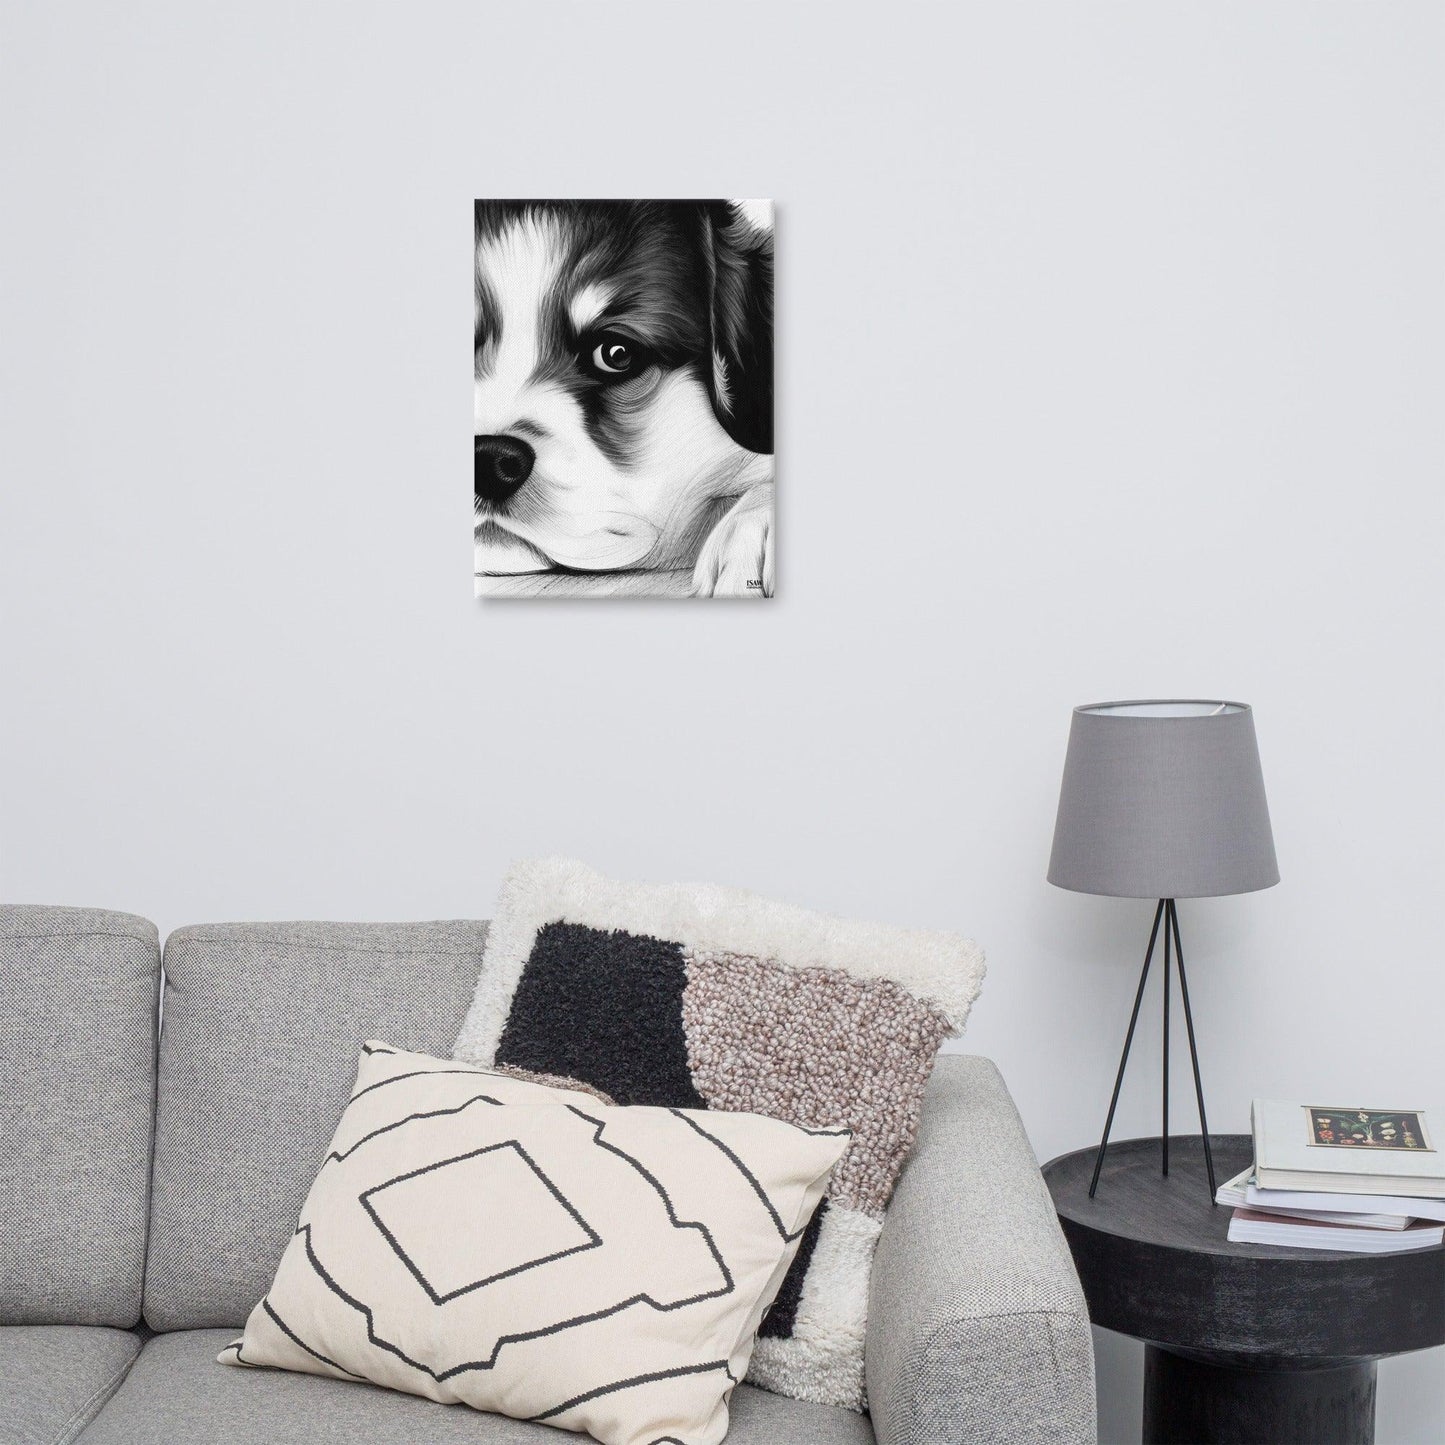 Puppy Love 3 - Canvas Print - iSAW Company